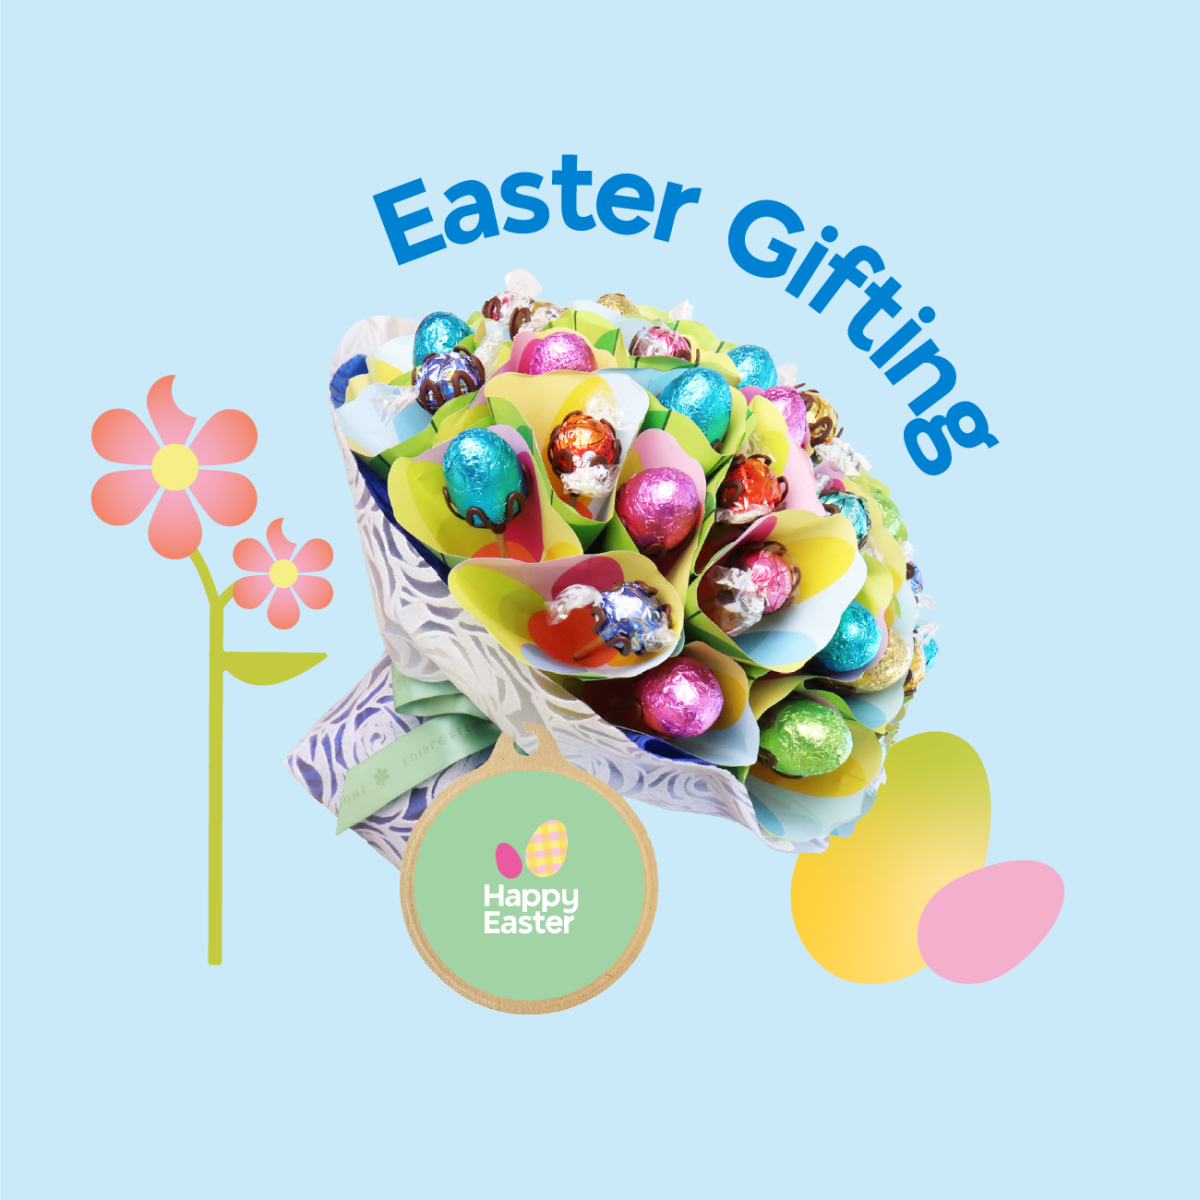 Unique Easter gifts 